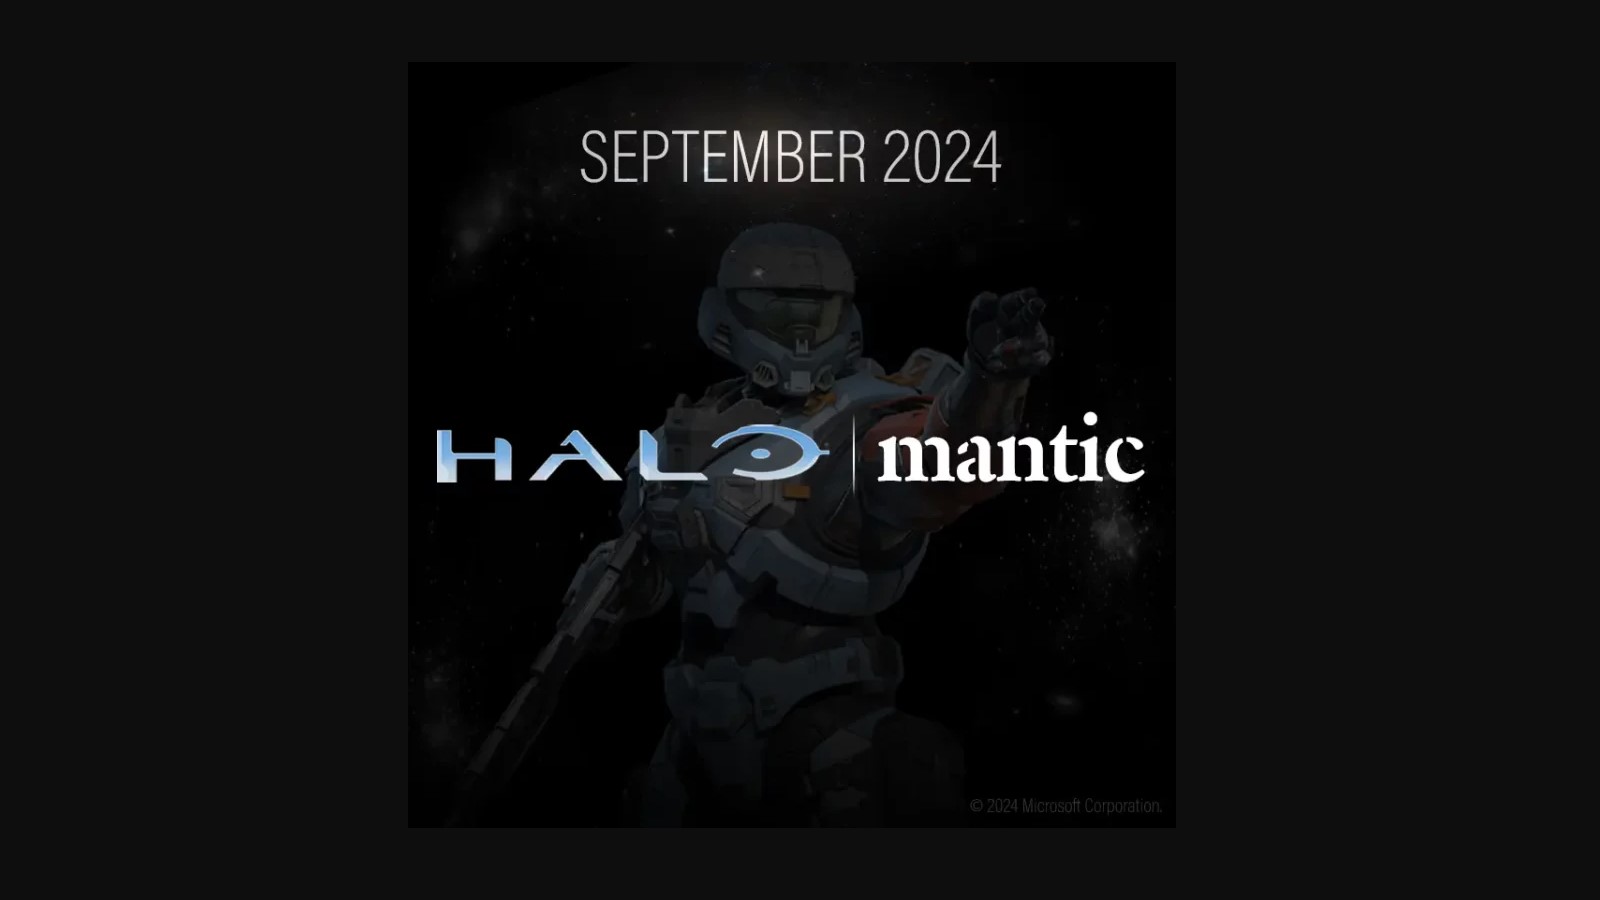 Mantic Games and 343 Industries have partnered to launch a brand-new Halo miniatures combat game